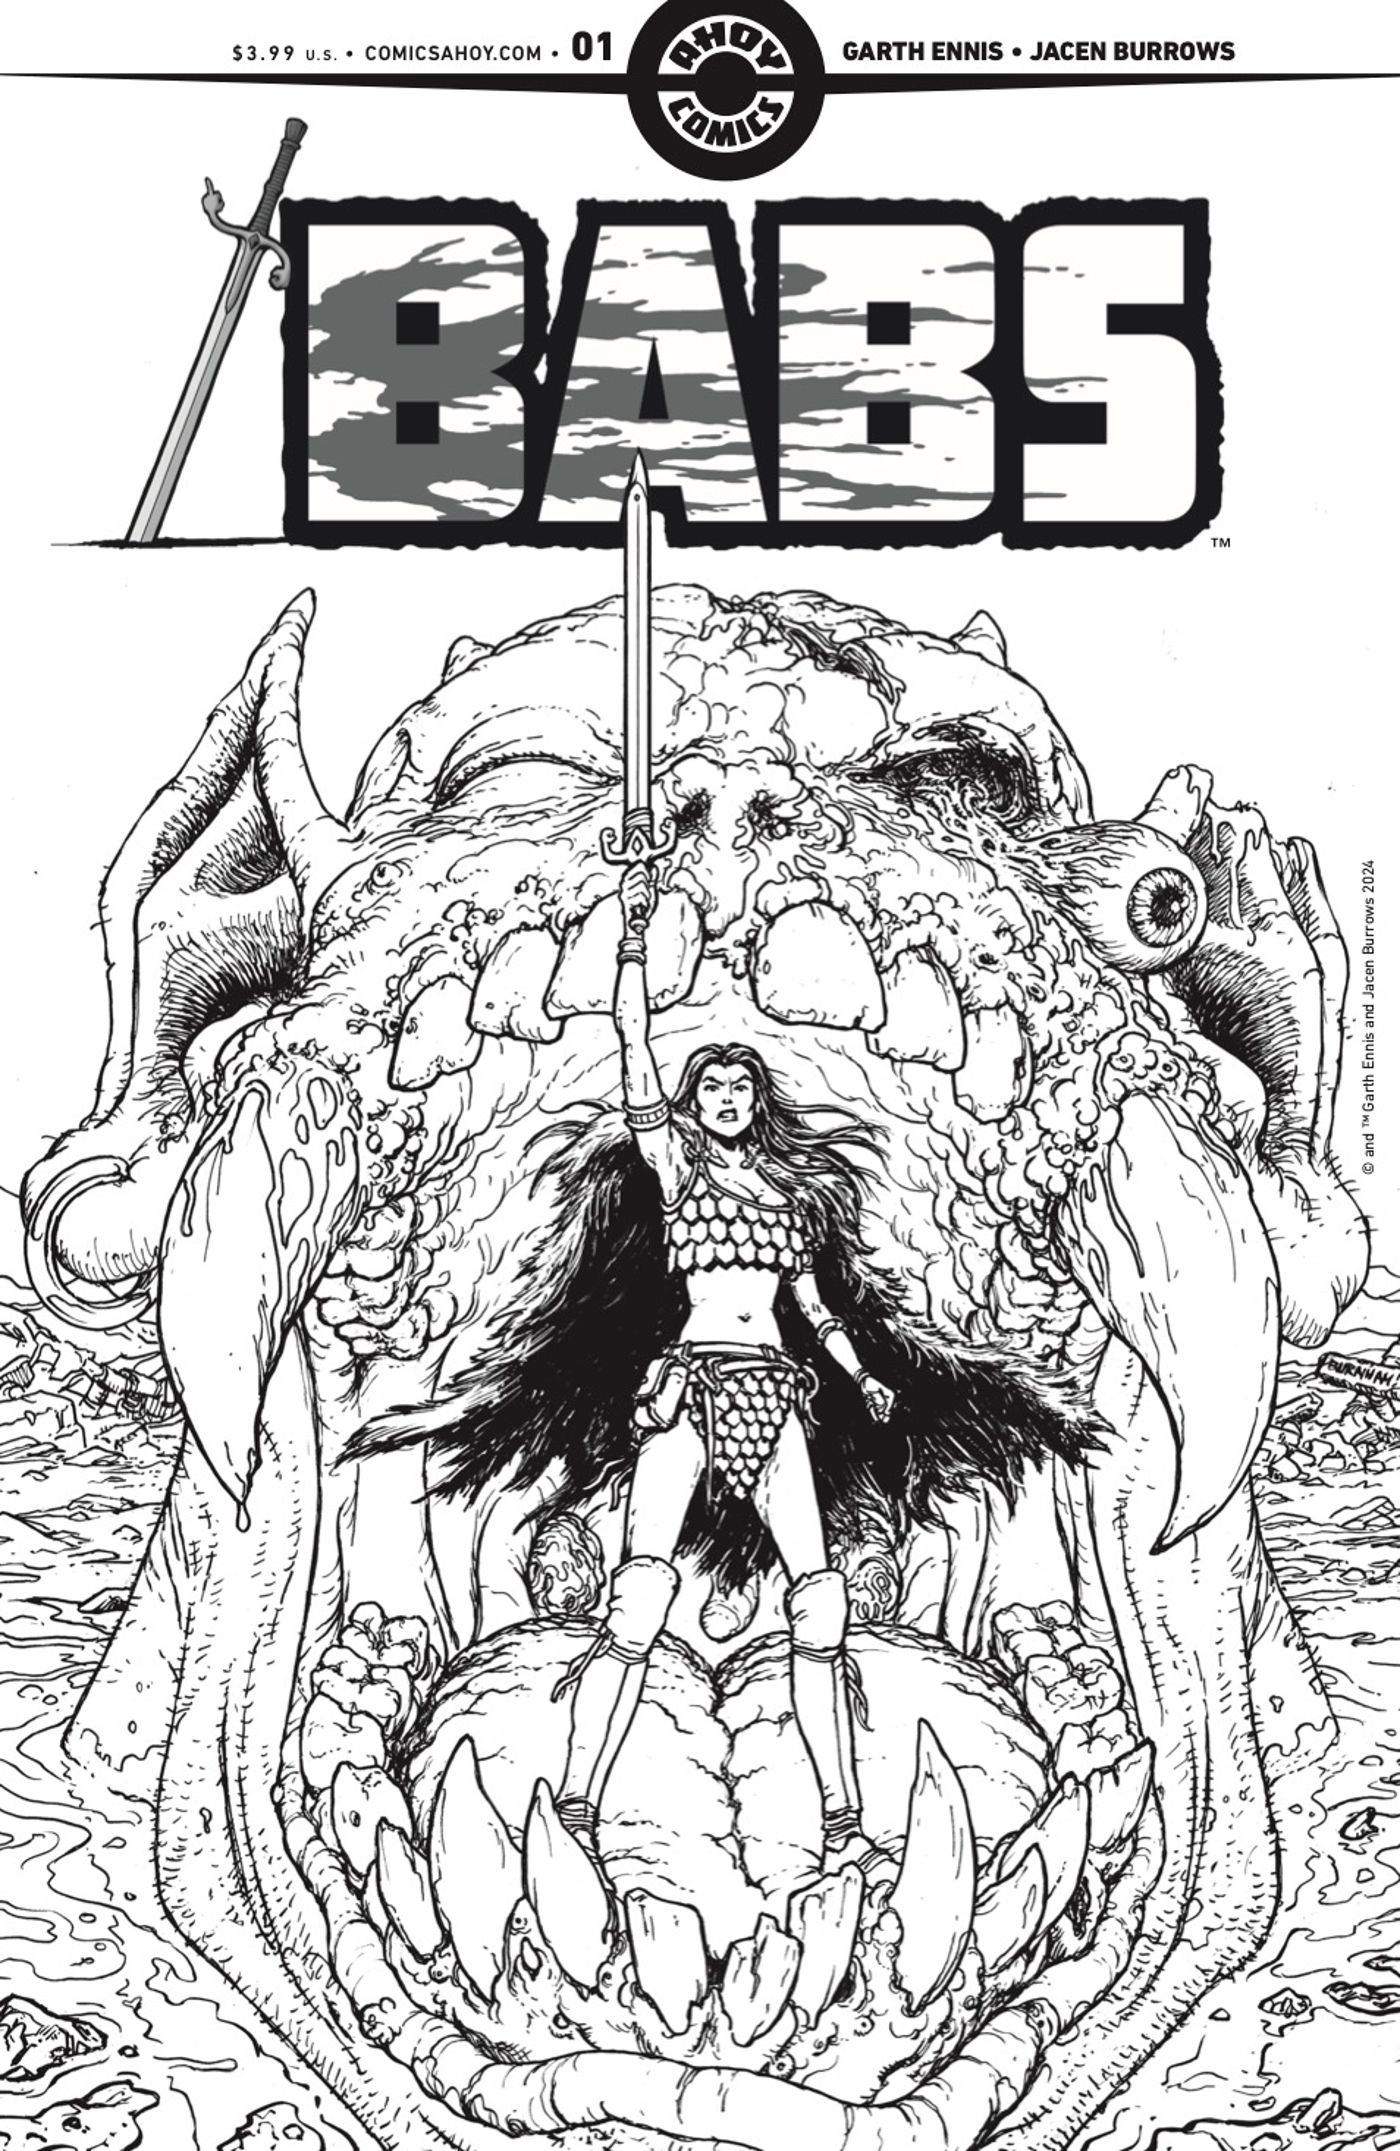 BABS black & white variant cover, main character holding sword standing in monster's mouth